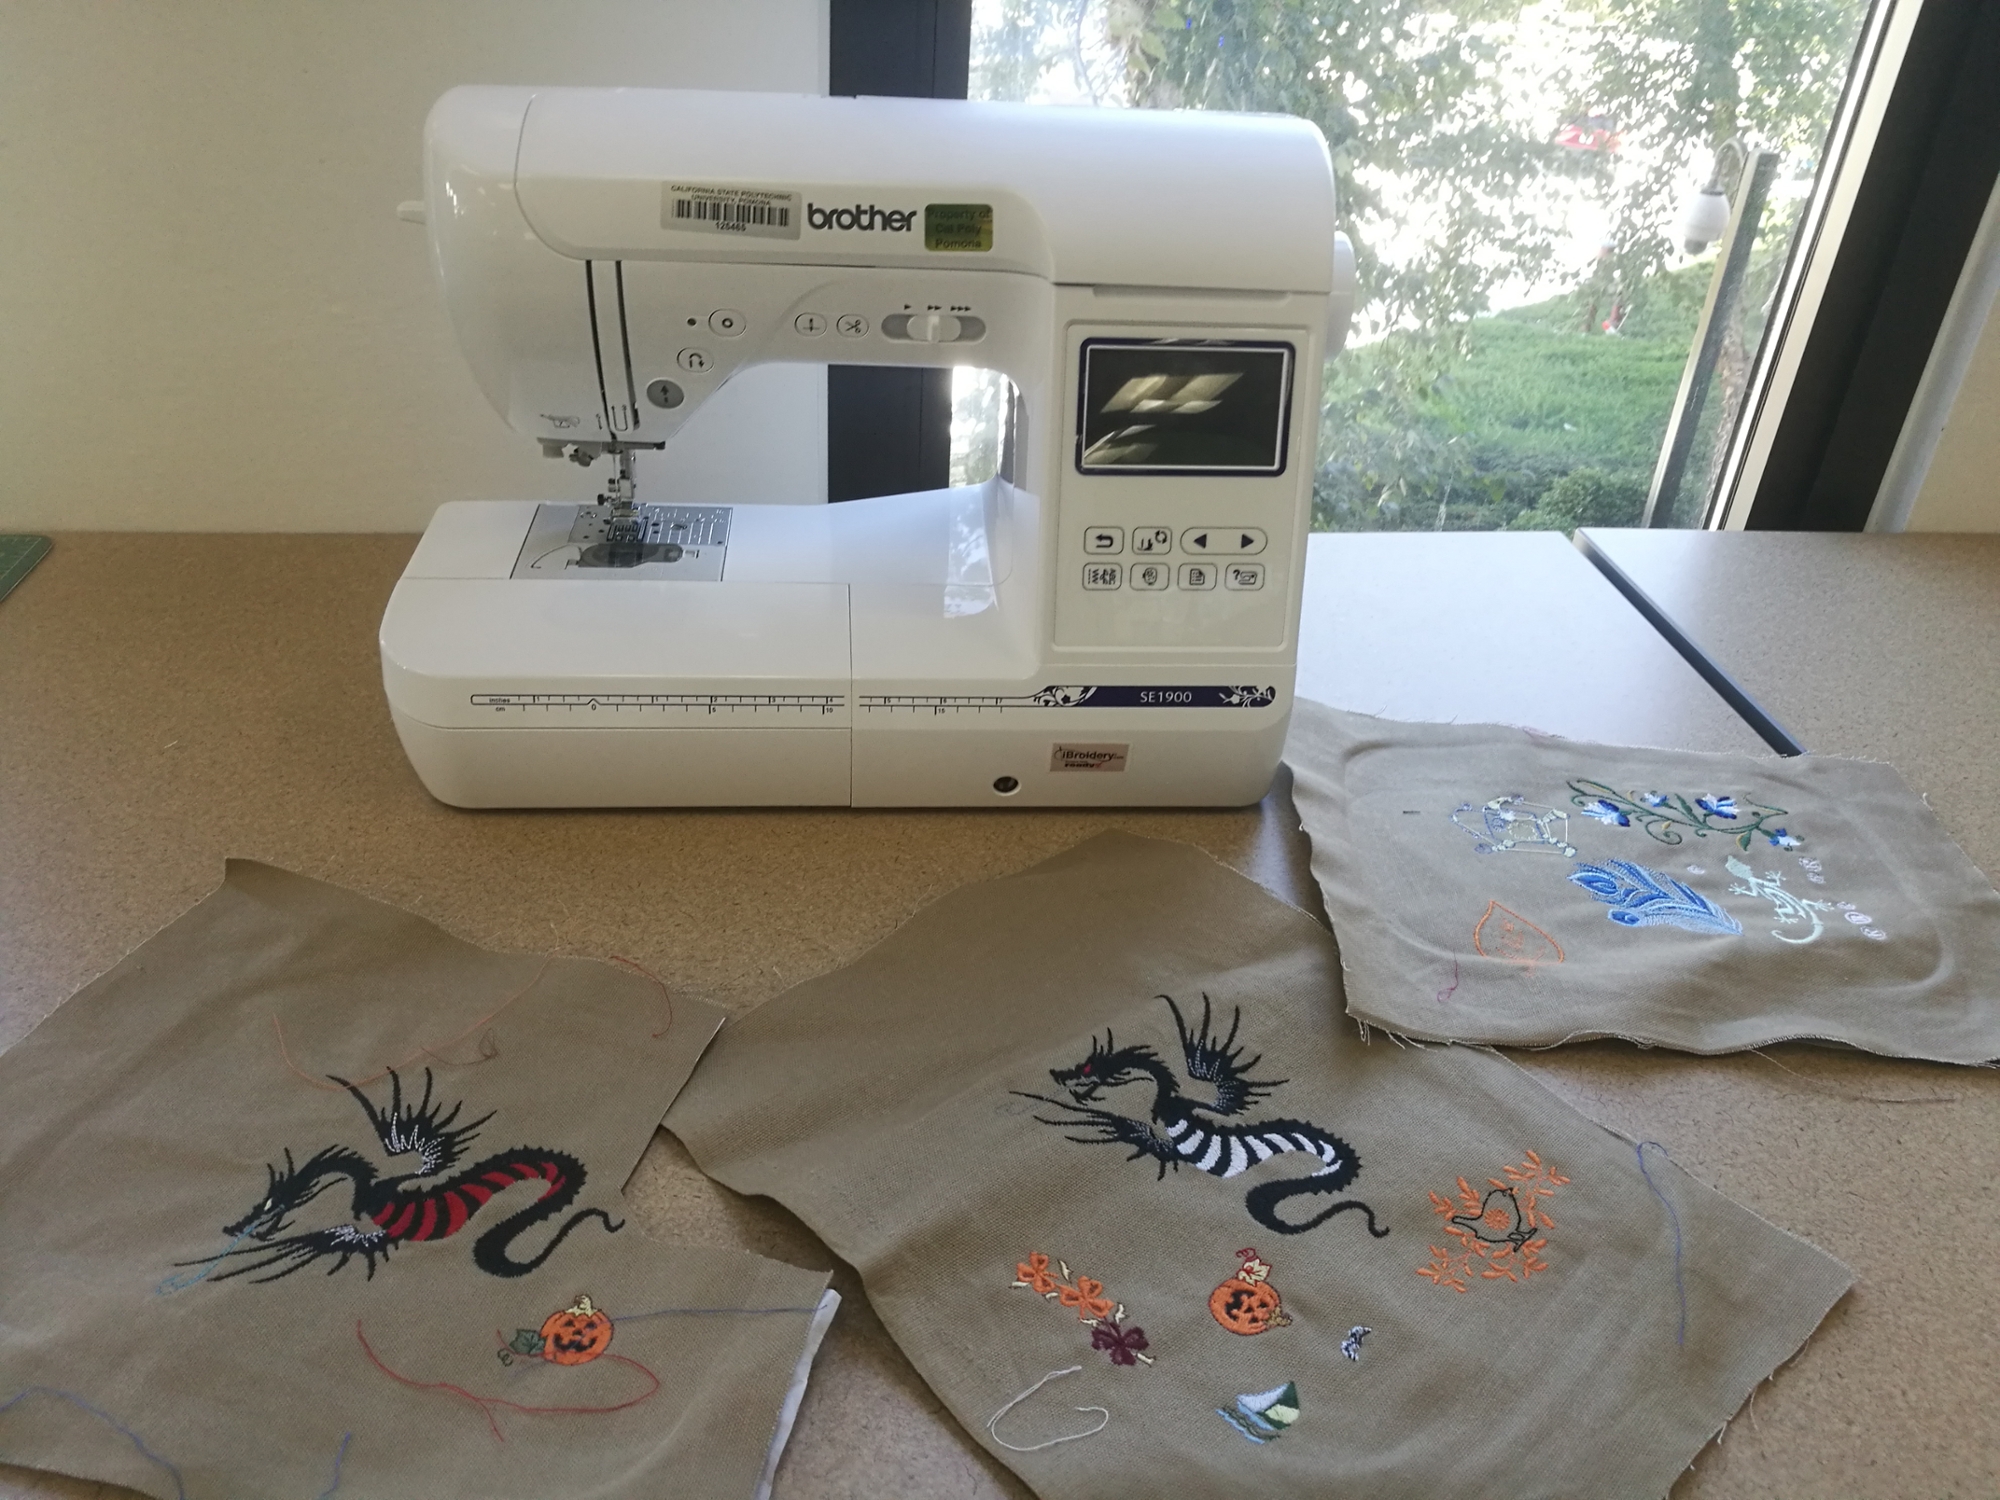 sewing/embroidery machine with designs